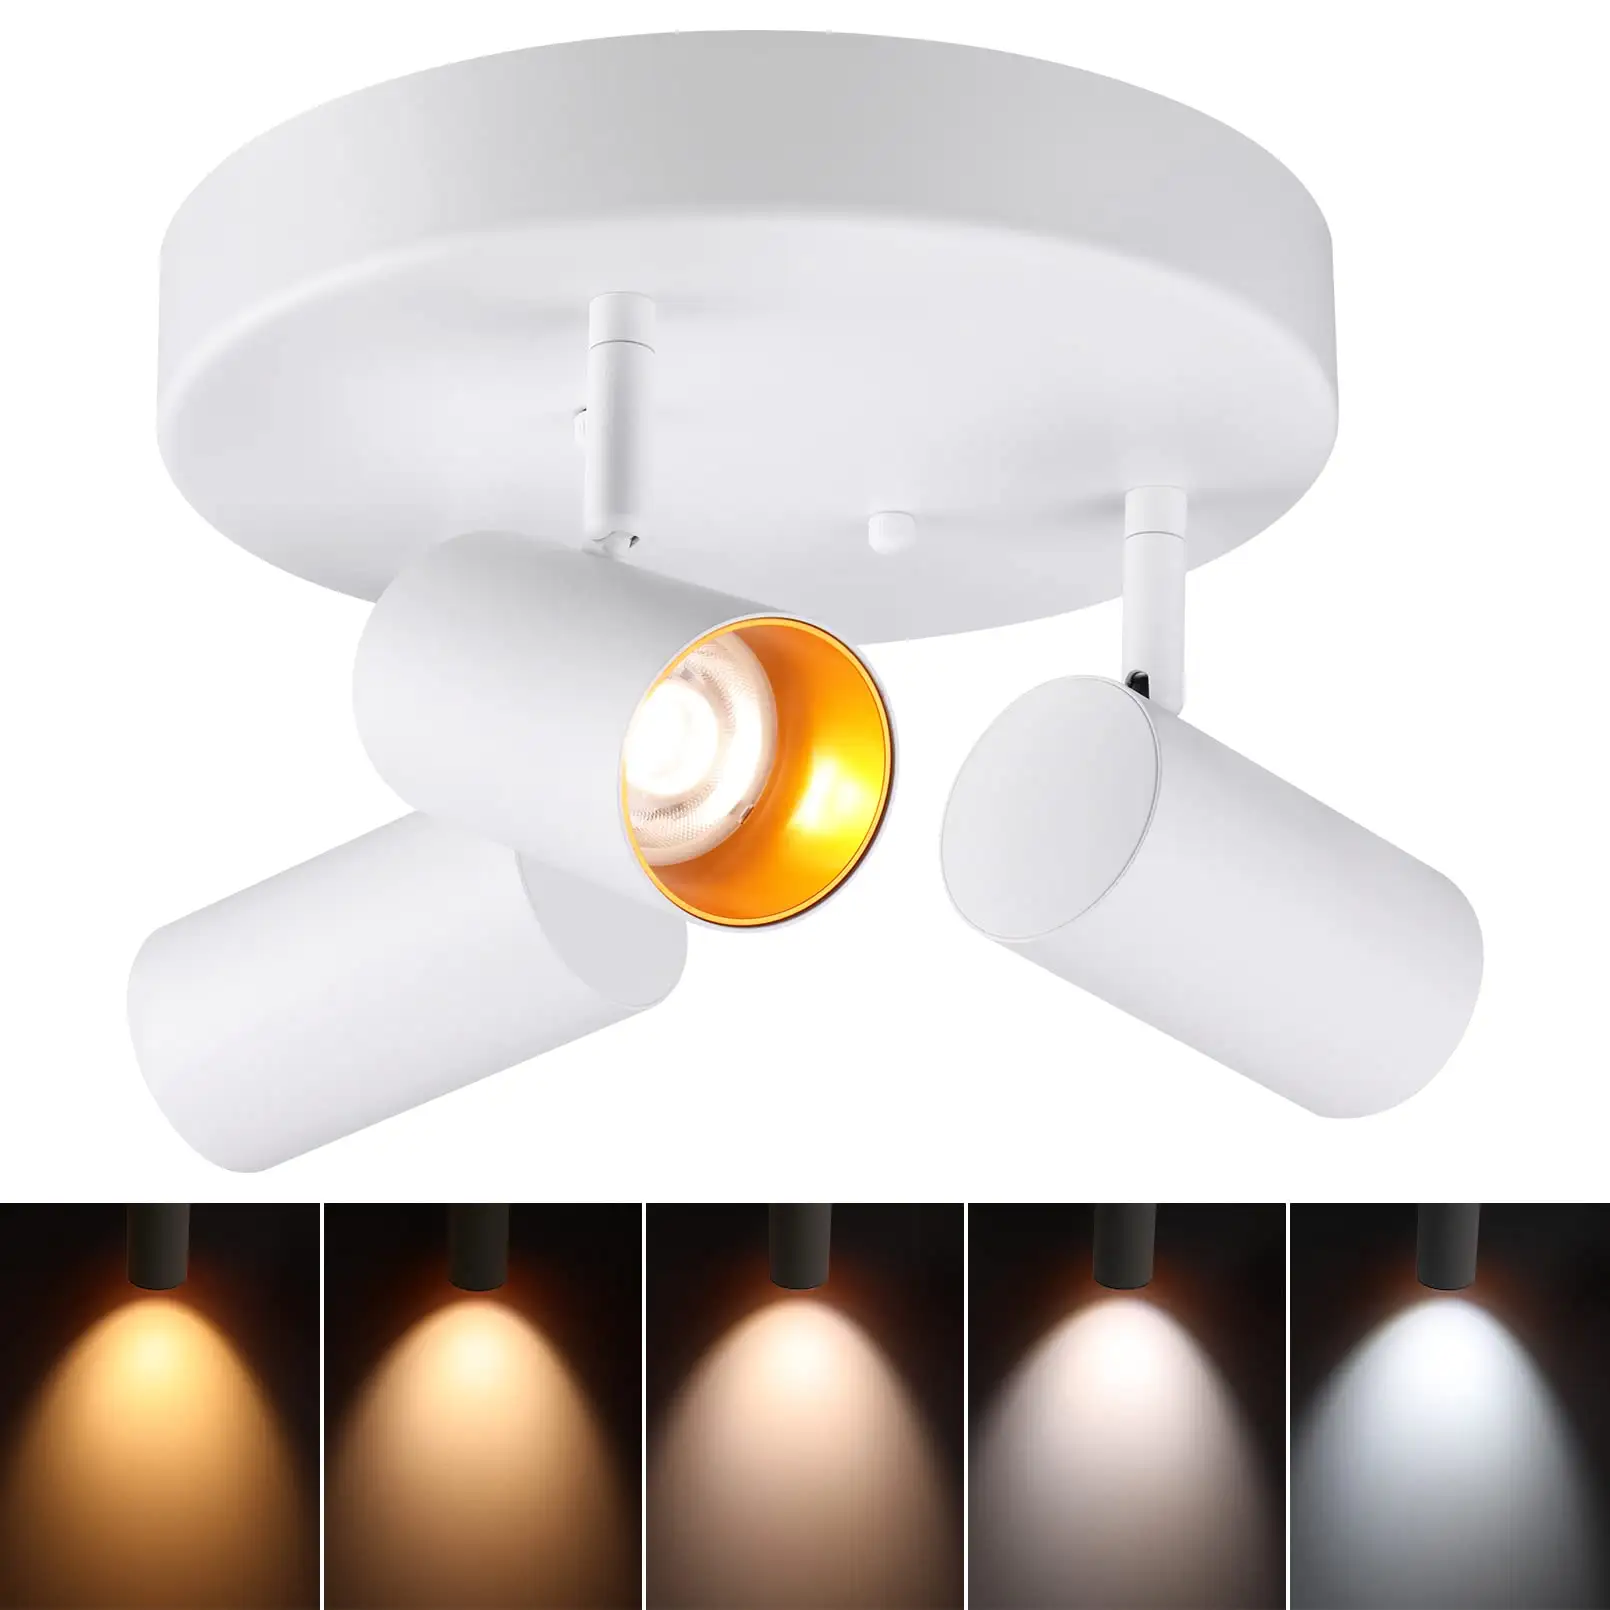 28W Modern LED Ceiling Light 3 Color Dimmable Lighting Fixture 3000K Surface Mounted Ceil Light For Bedroom Kitchen Hallway Lamp